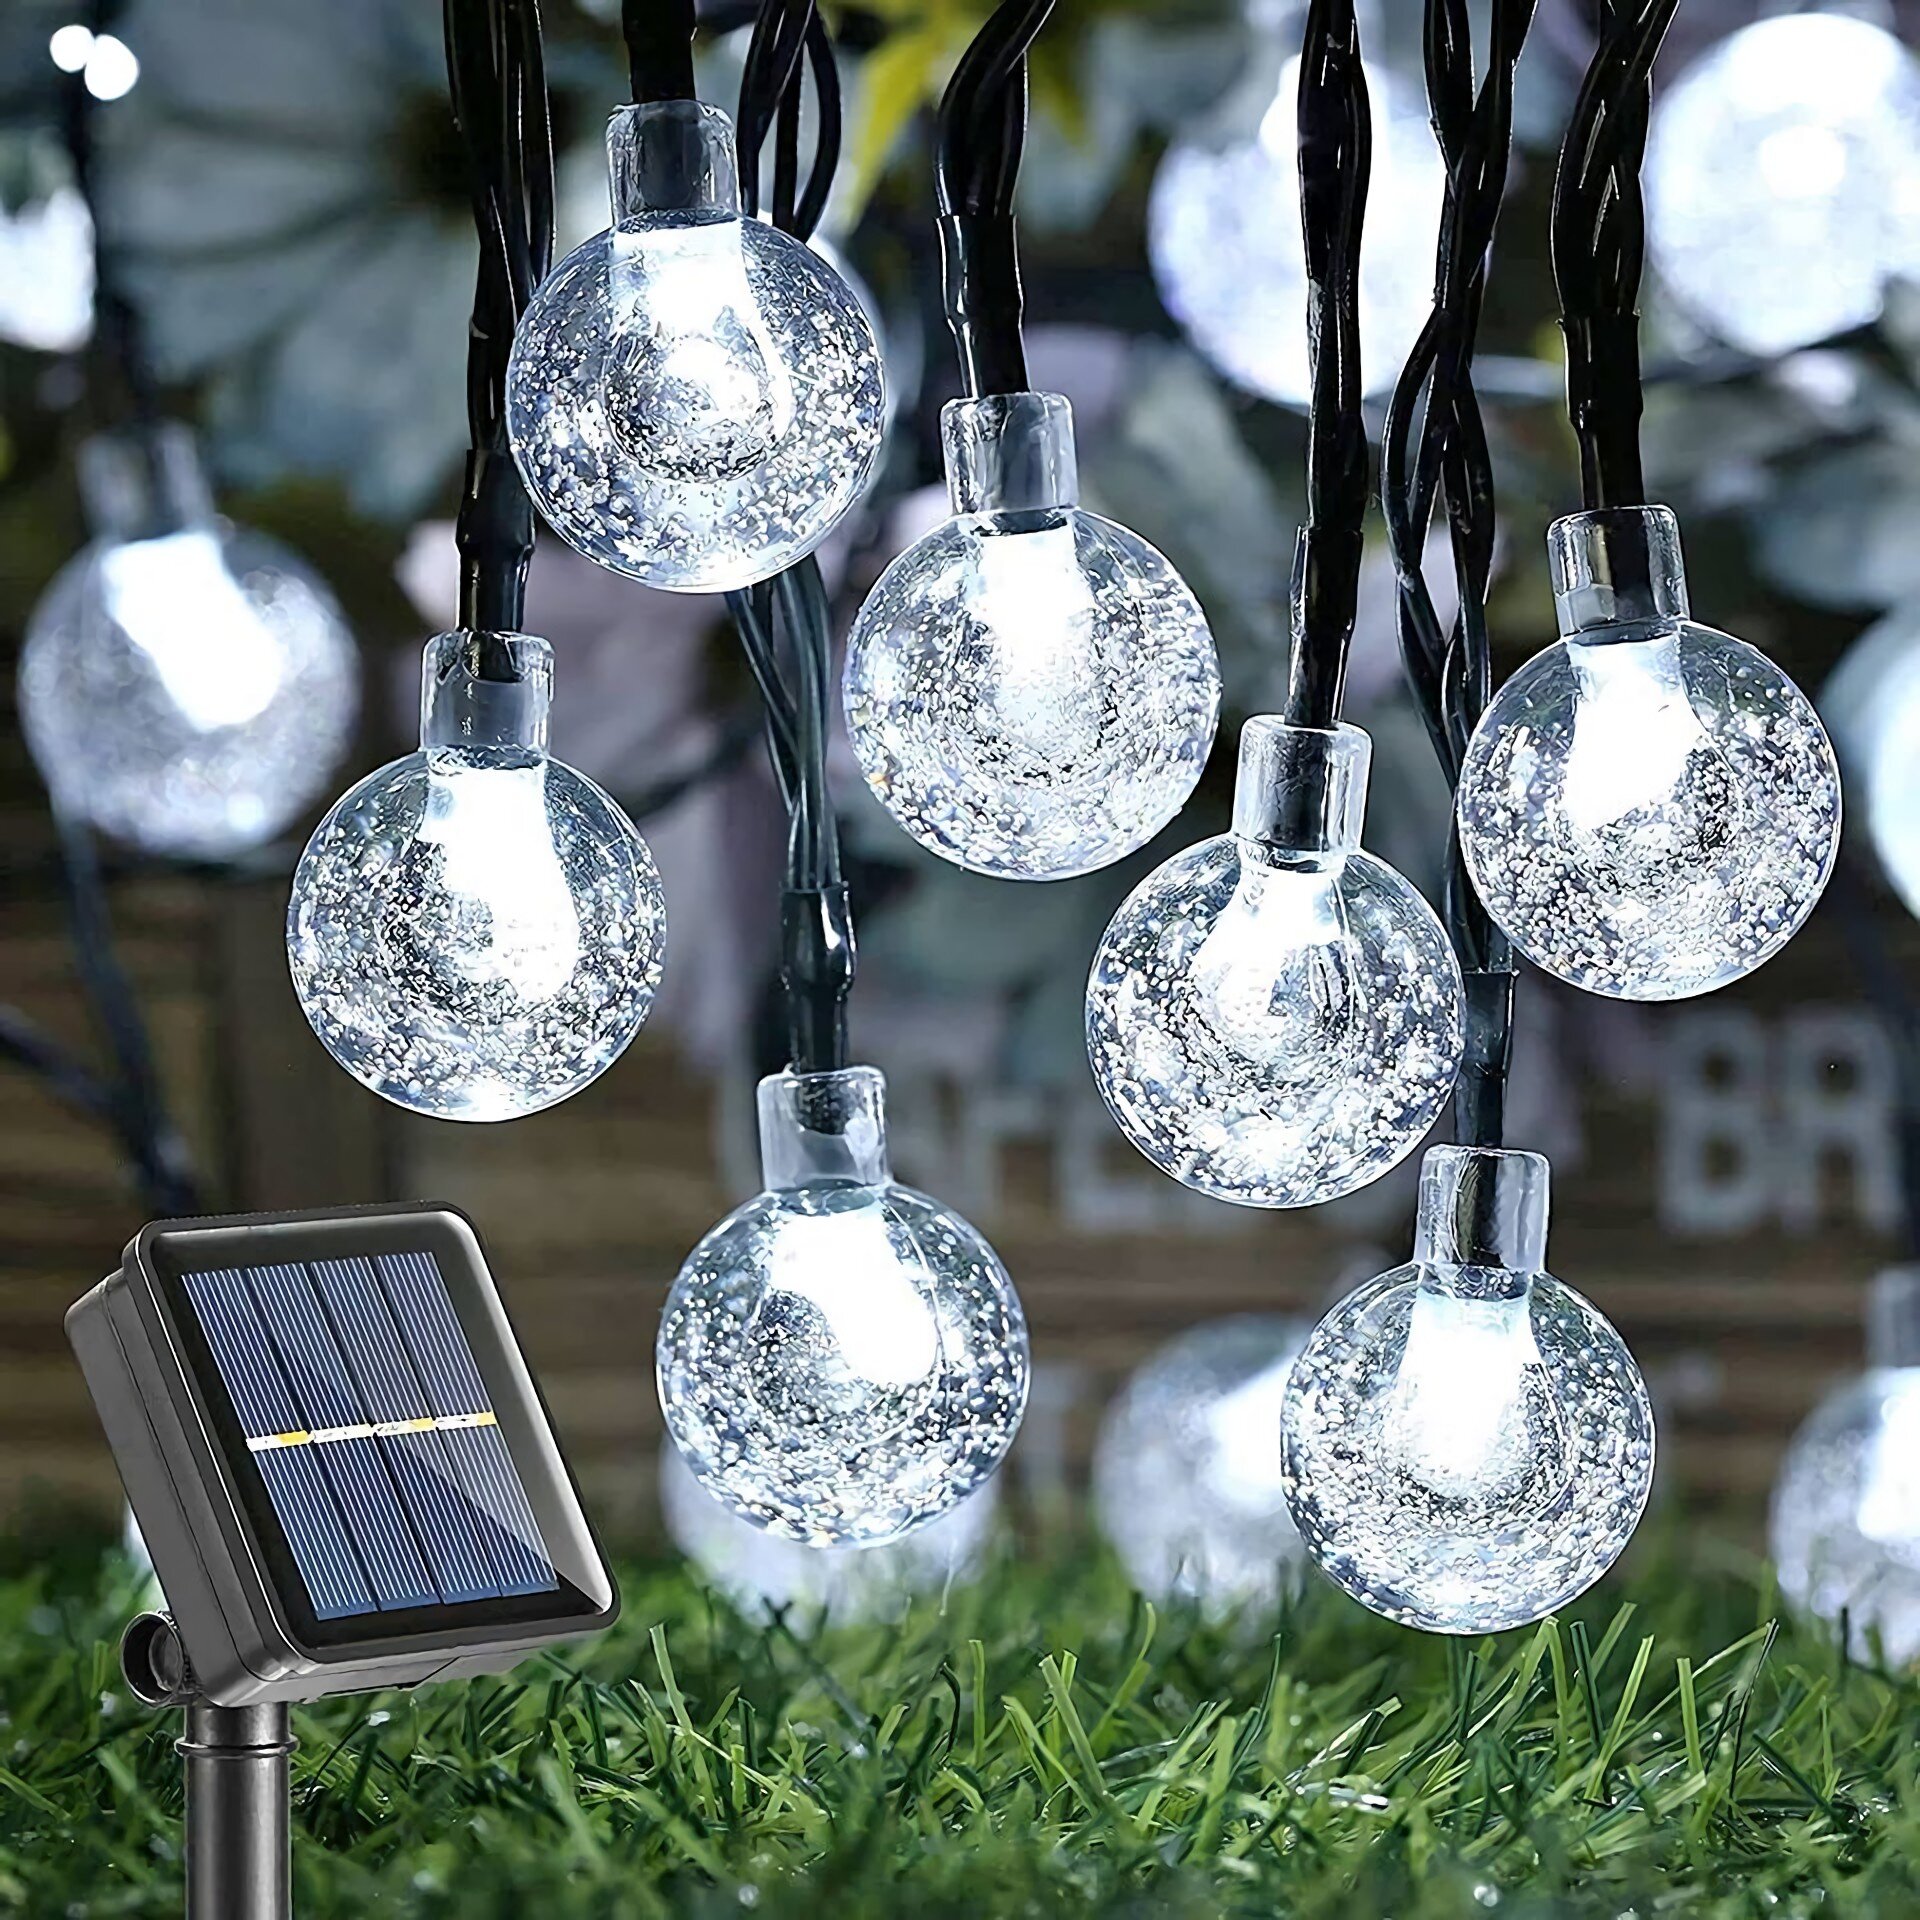 Outdoor Solar Powered 30 LED String Light Garden Patio Yard Landscape Lamp Party 